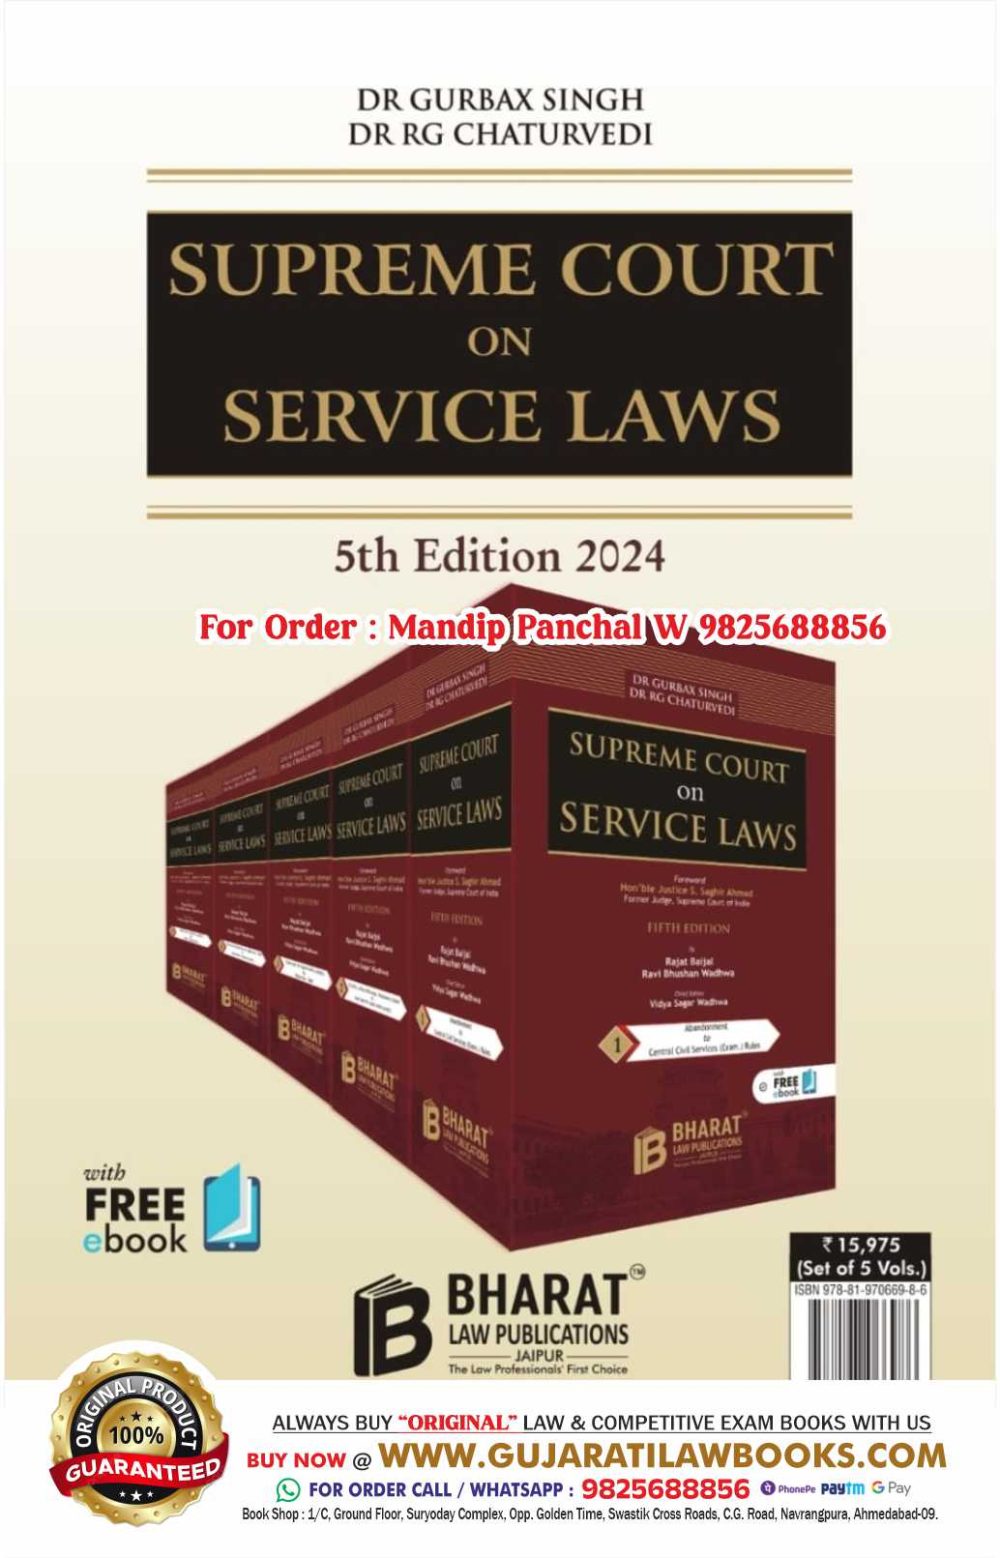 SUPREME COURT ON SERVICE LAWS (In 5 Volumes) - by Dr Gurbax Singh Dr RG Chaturvedi - Latest 5th Edition March 2024 Bharat Law publication